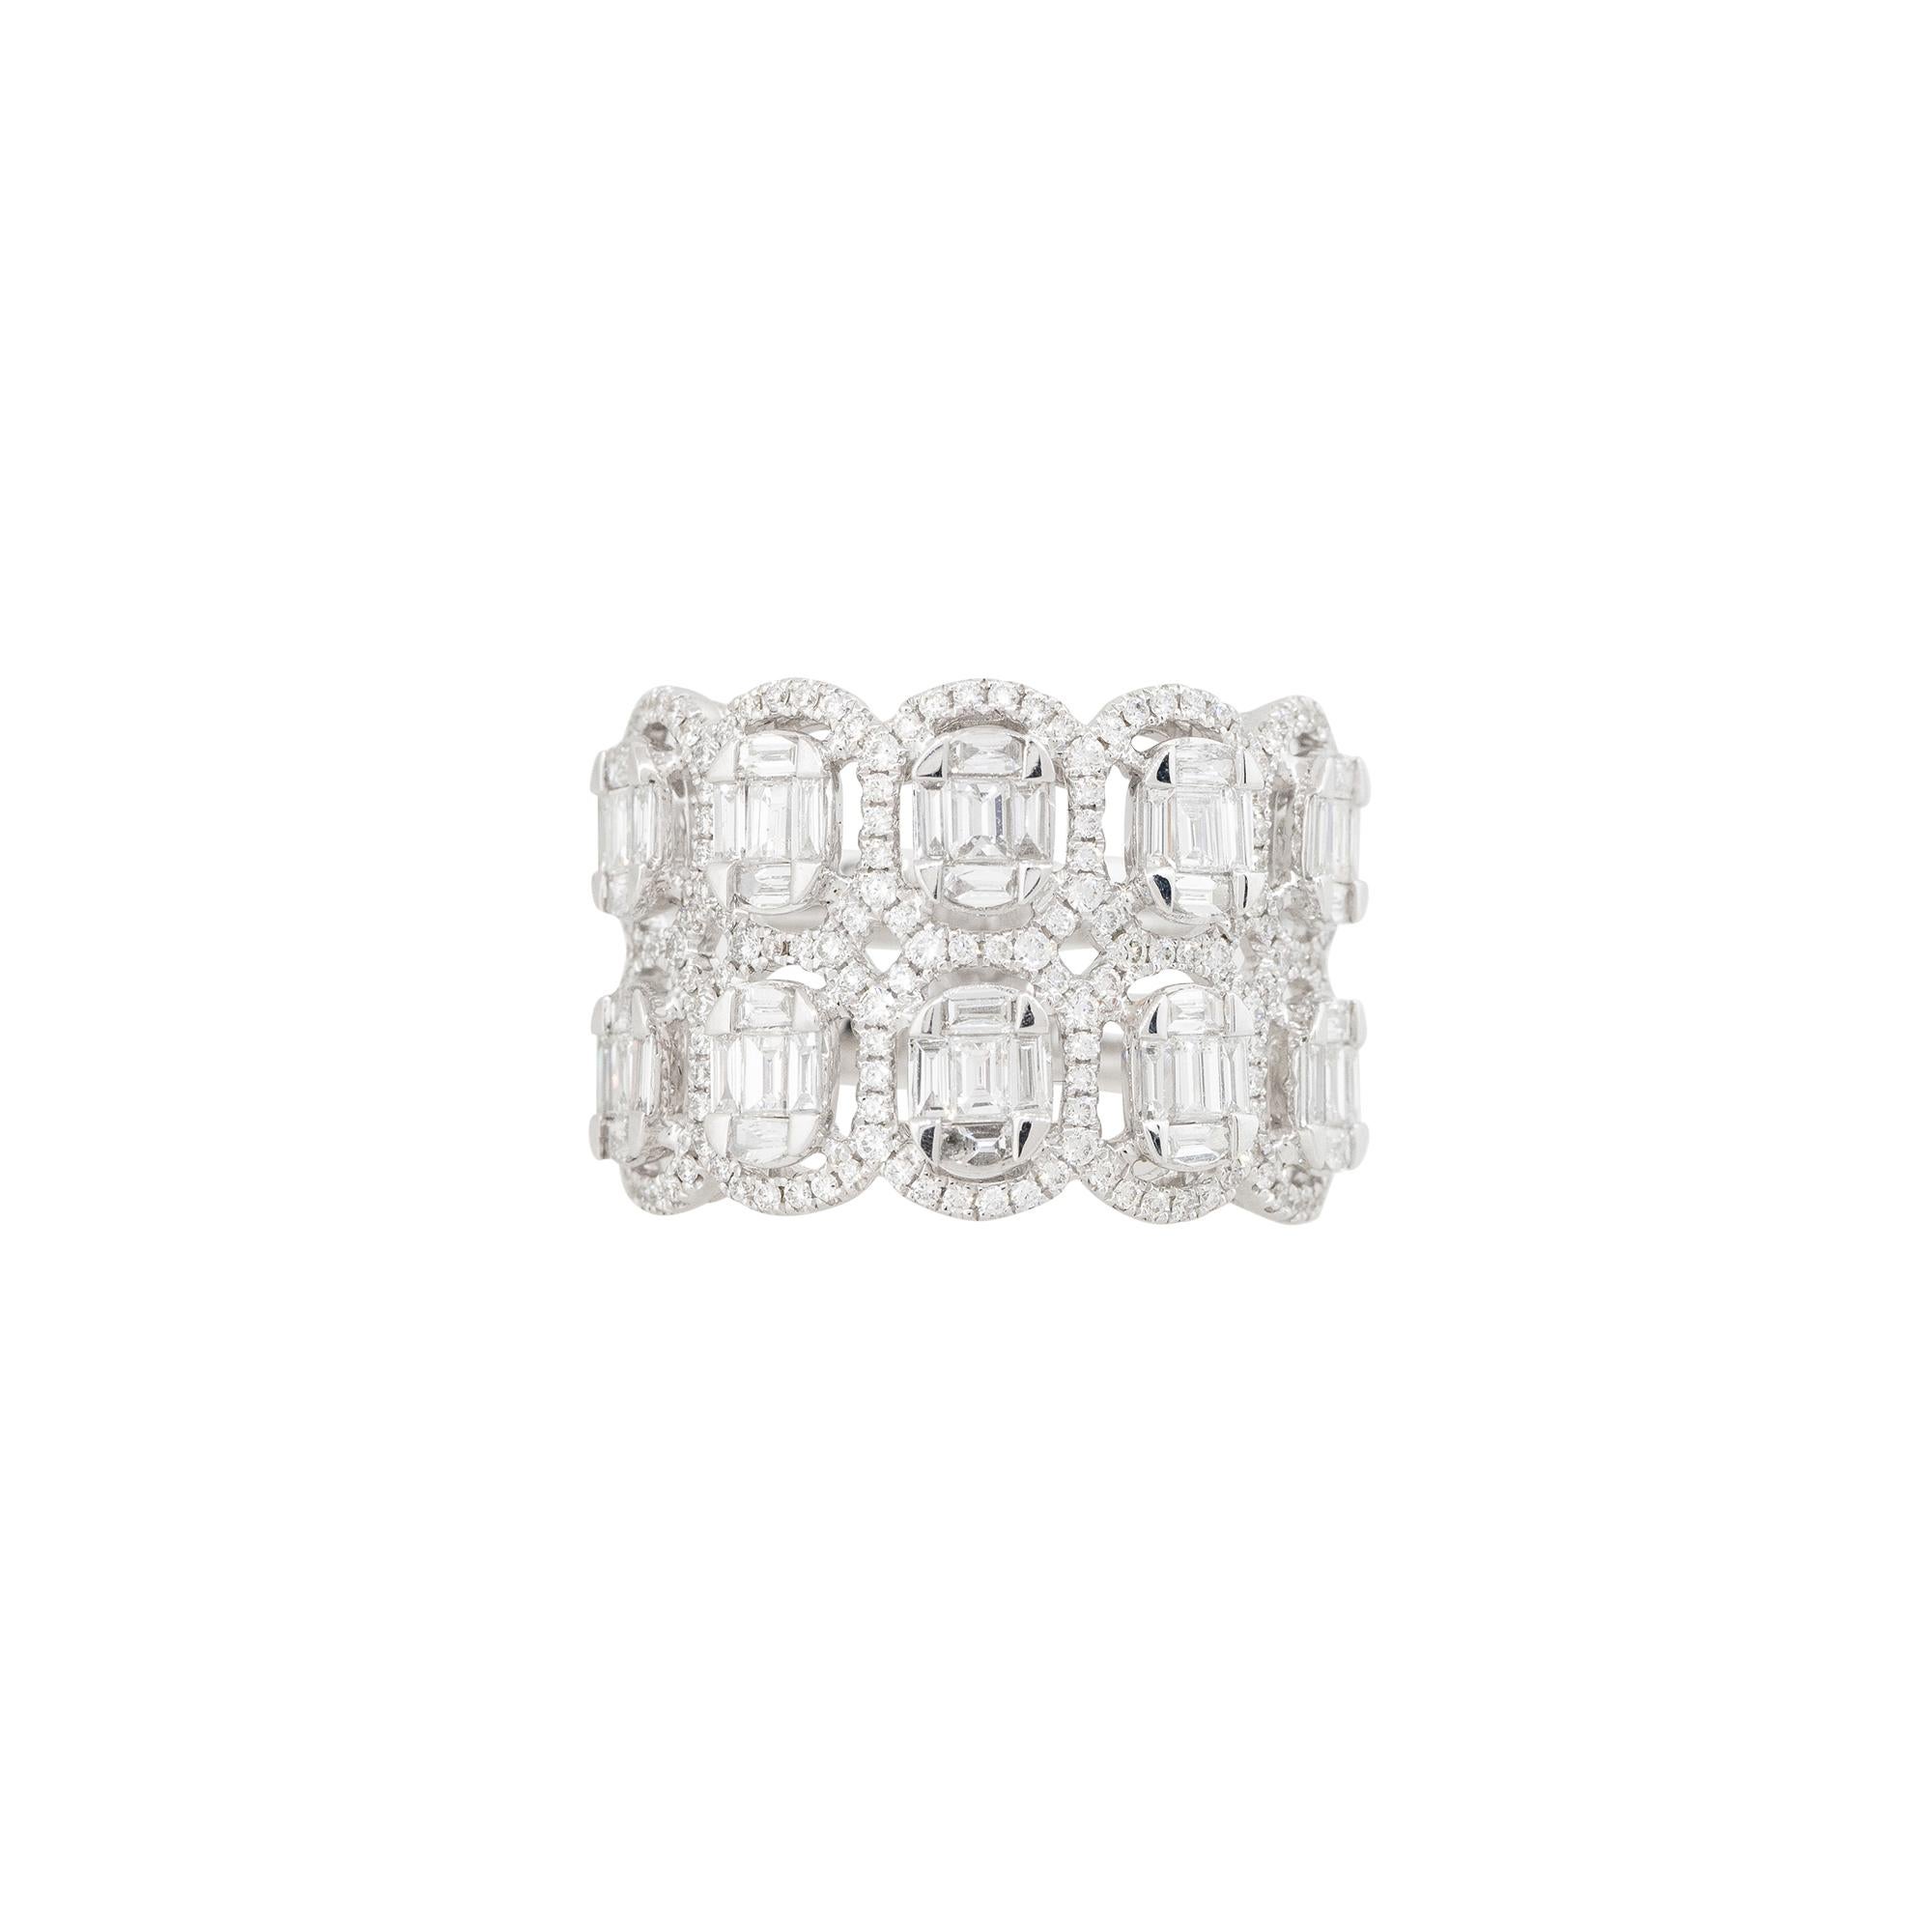 18k White Gold 1.84ctw Mosaic Diamond Double Row 5 Station Ring

Product: Wide Double Row 5-Station Diamond Band
Material: 18k White Gold
Diamond Details: There are approximately 1.84 carats of Baguette and Round Brilliant cut diamonds. There are